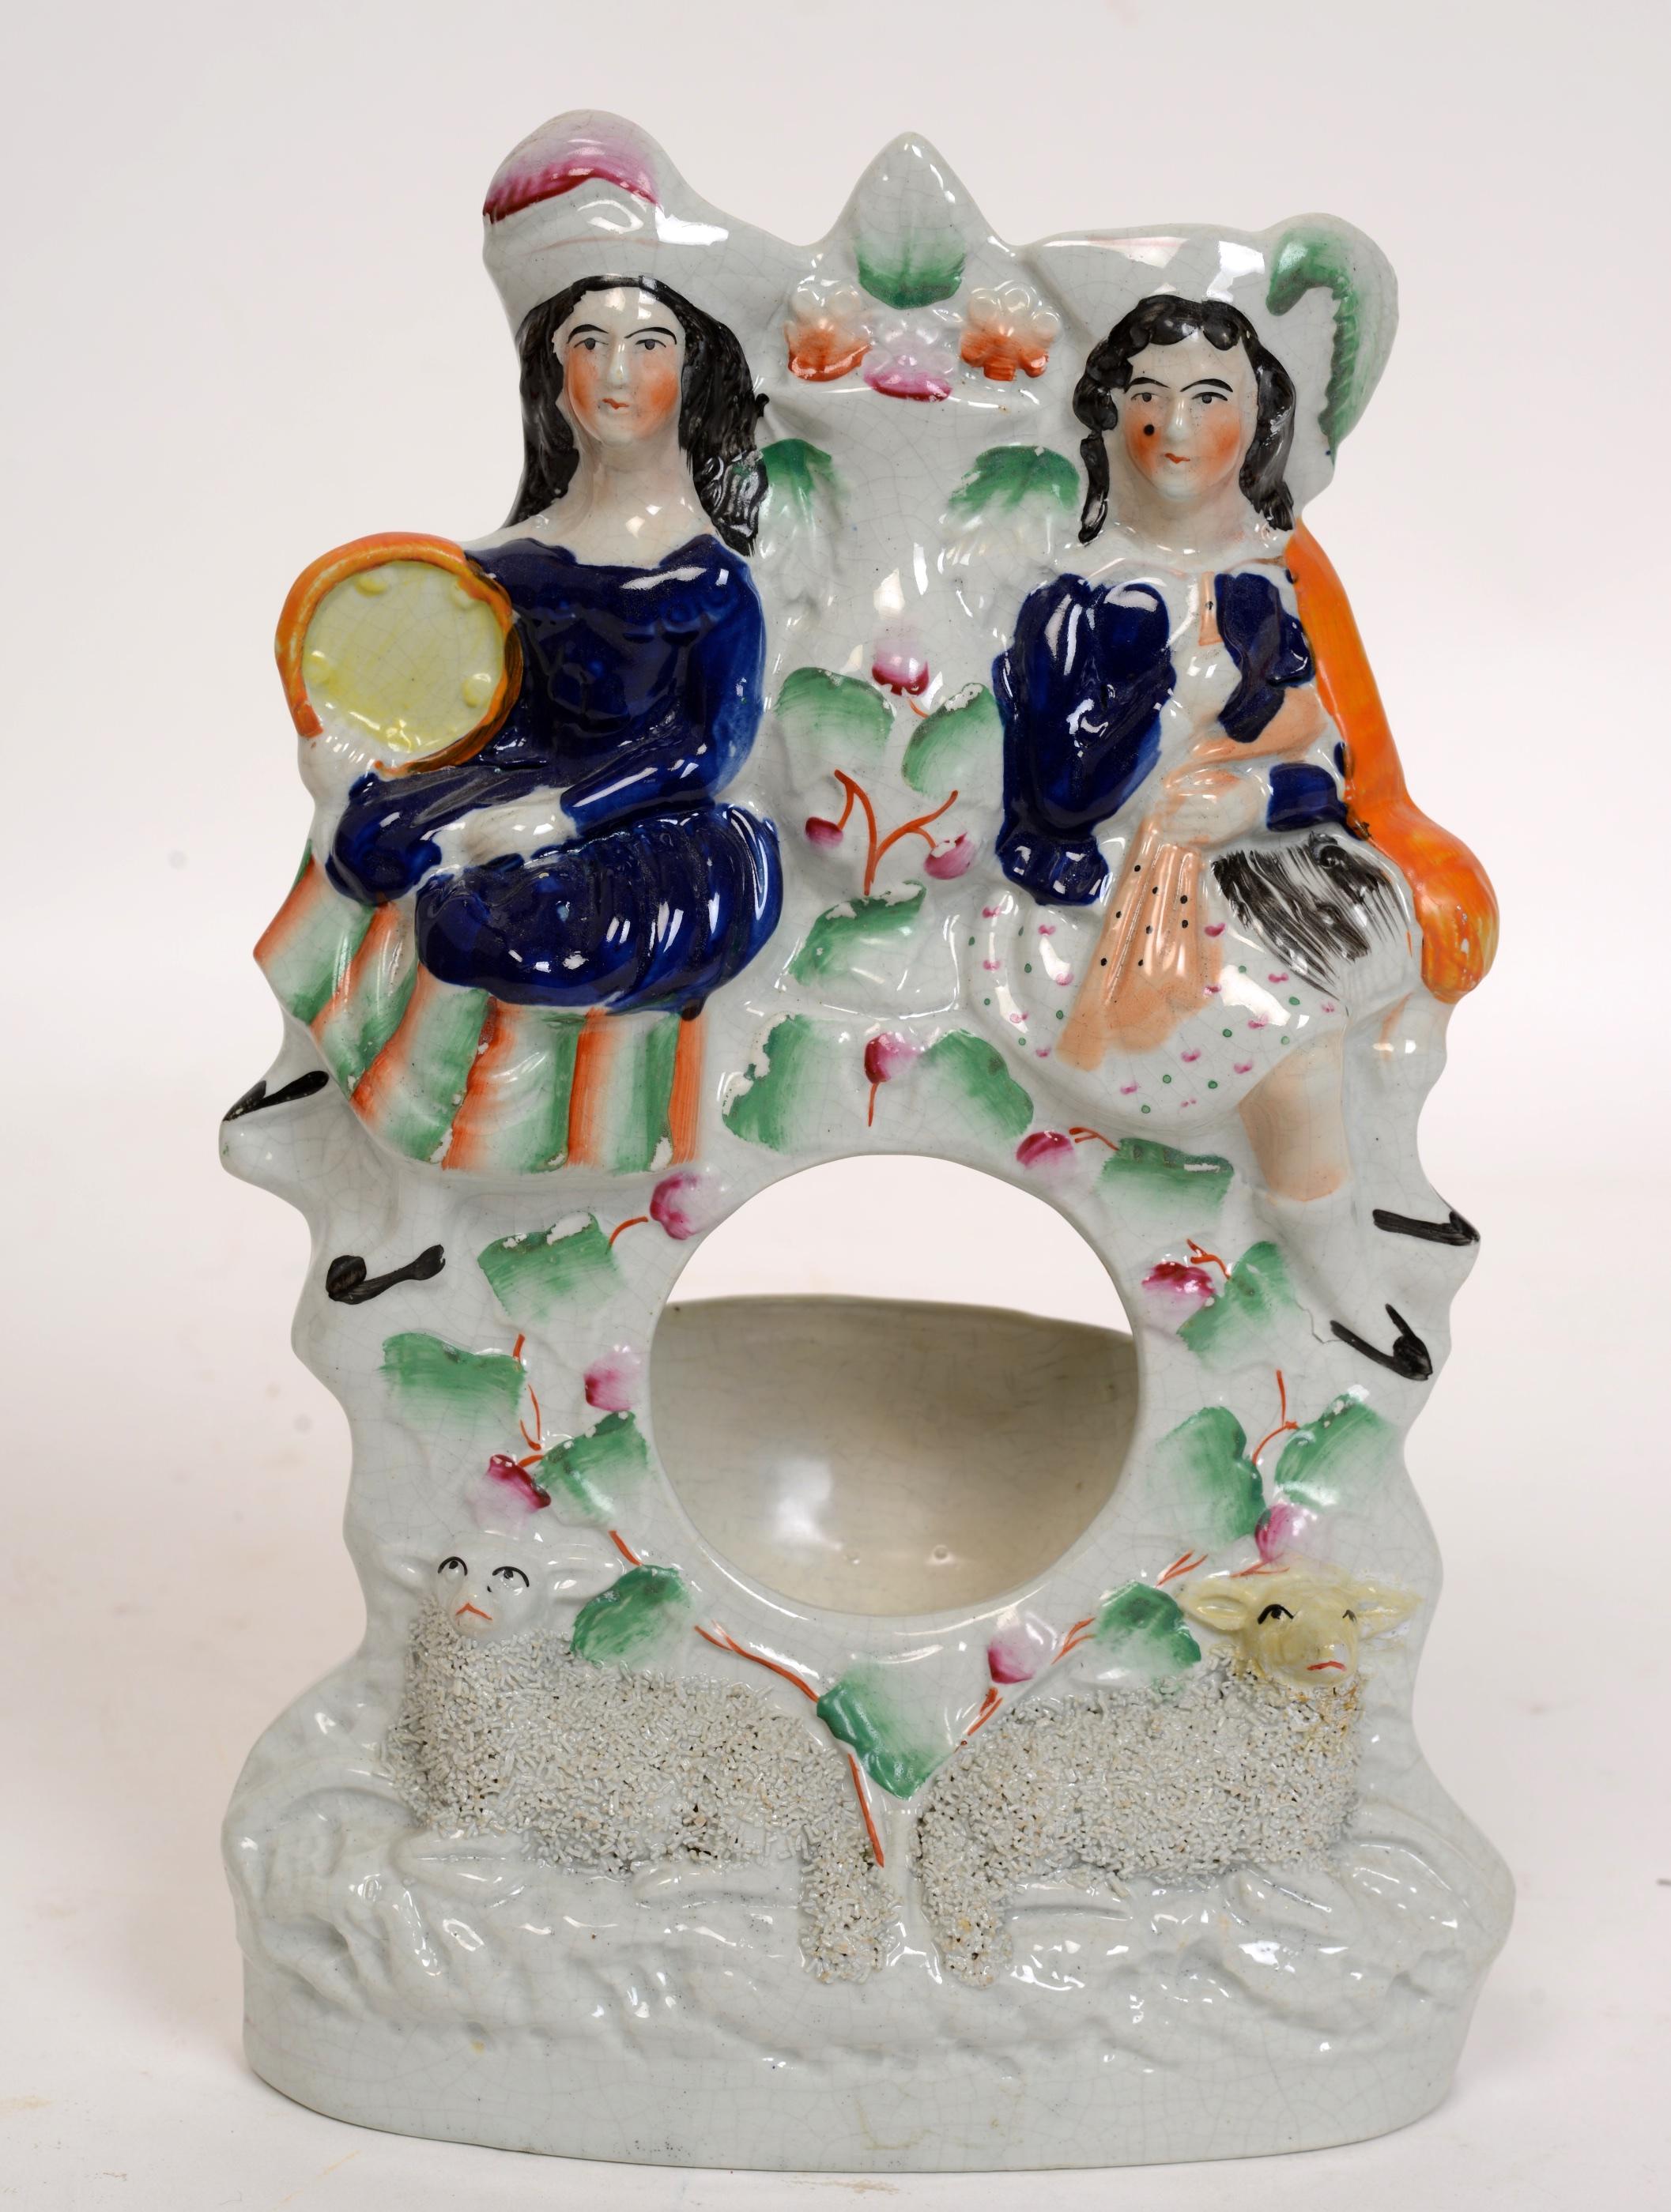 English Staffordshire watch holder with two figures and a pair of lambs, mid-19th century. Beautifully decorated and lambs have grainey decoration. This 